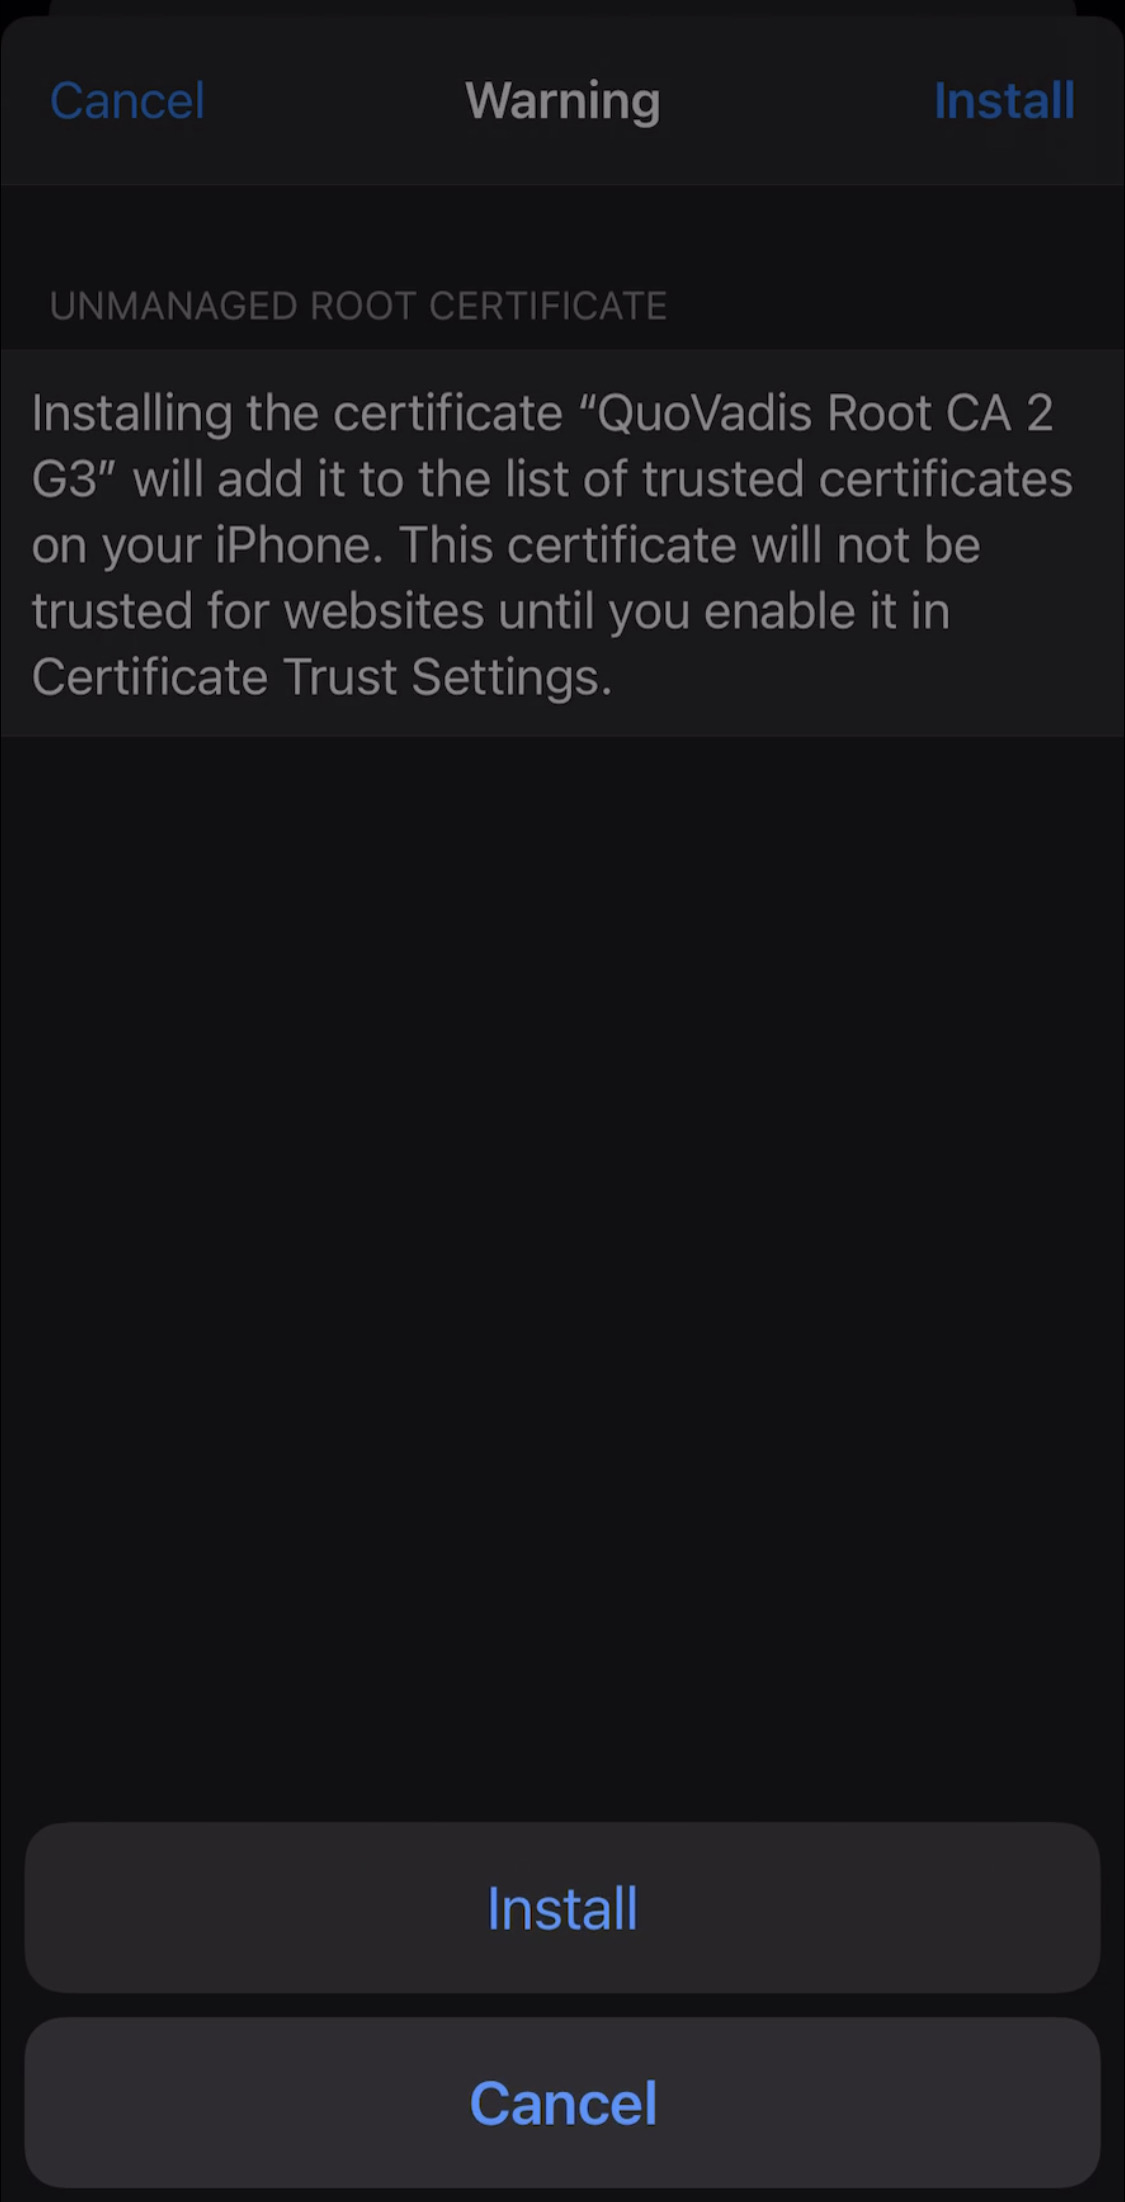 Warning message saying that a certificate will be added to the list of trusted certificates on the device. Buttons for Install and Cancel (bolded) are at the bottom of the warning